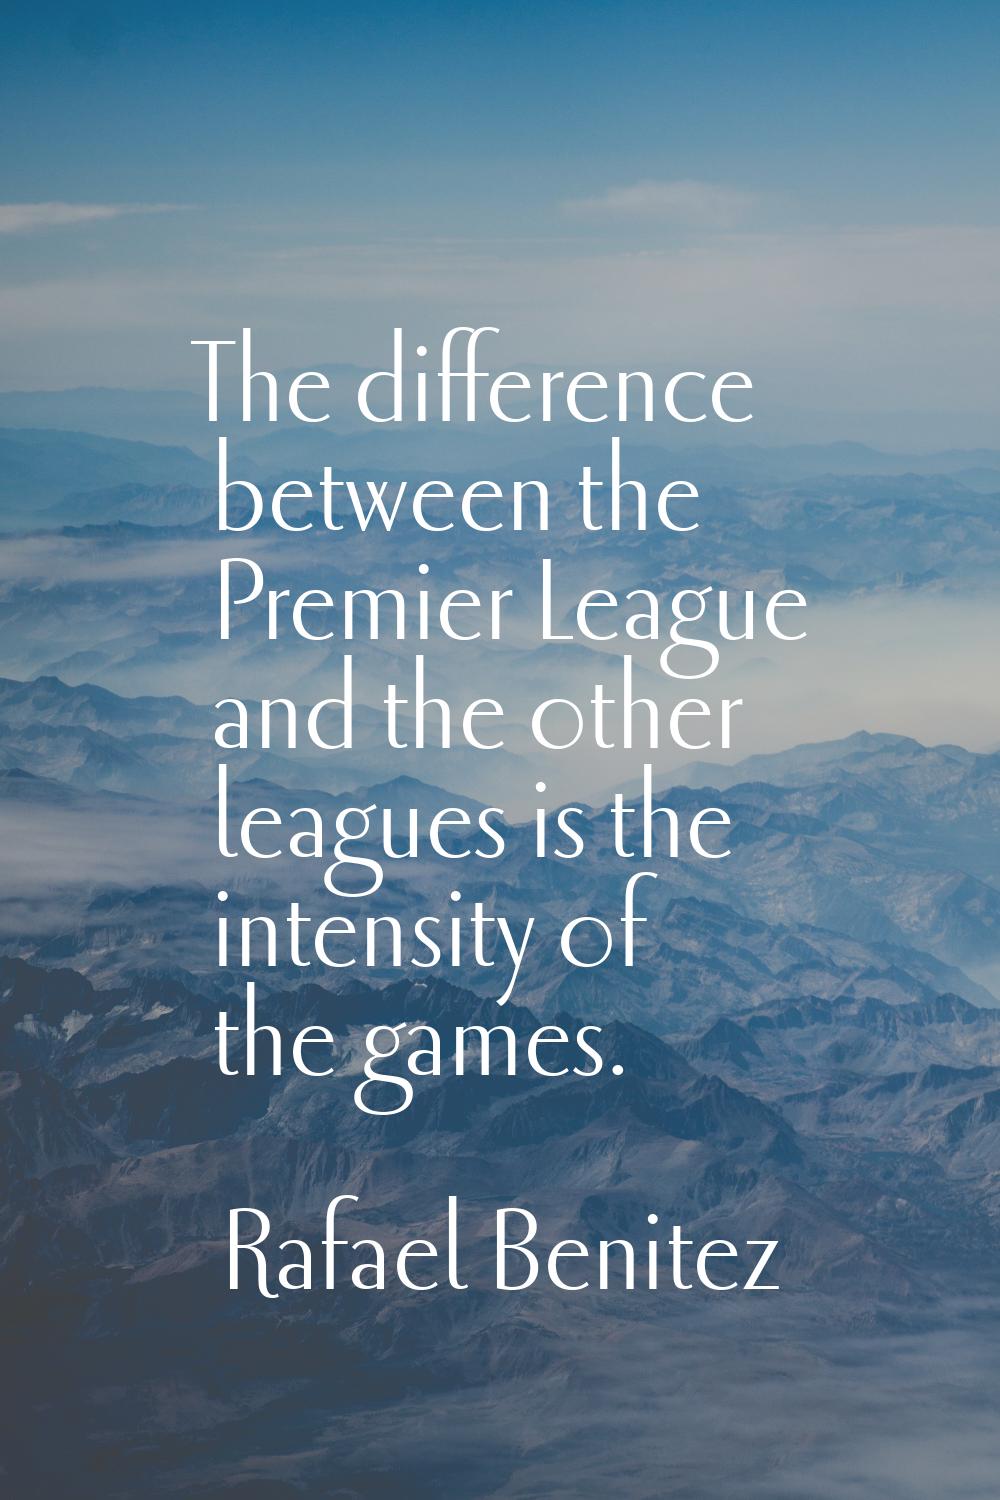 The difference between the Premier League and the other leagues is the intensity of the games.